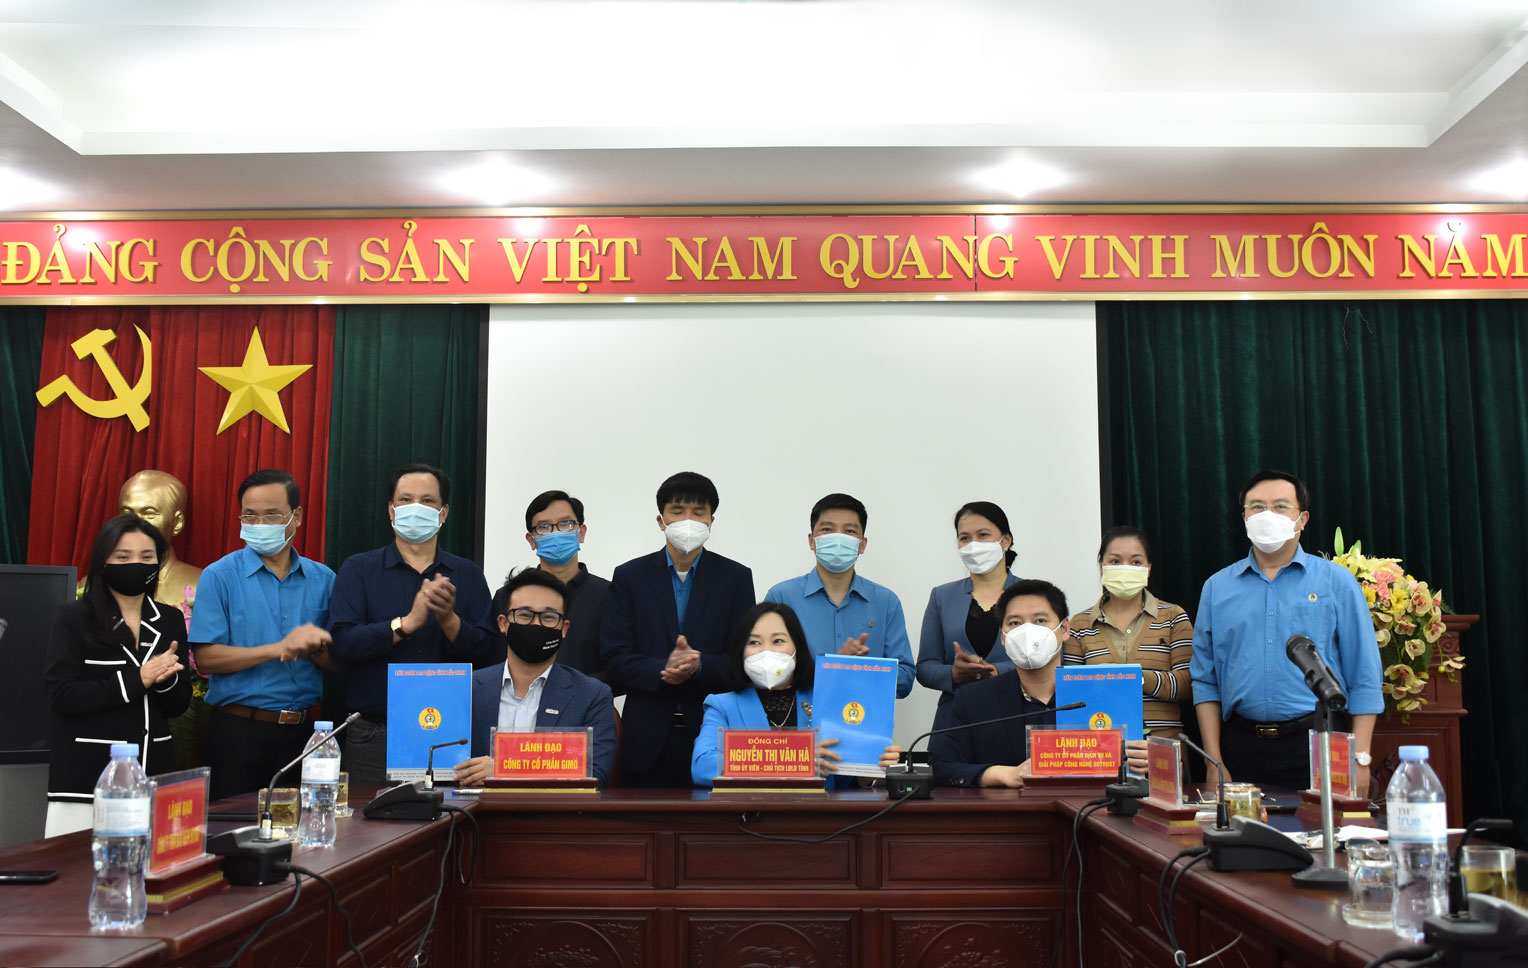 GIMO lands partnership with Bac Ninh’s Federation of Labour to improve worker well-being  